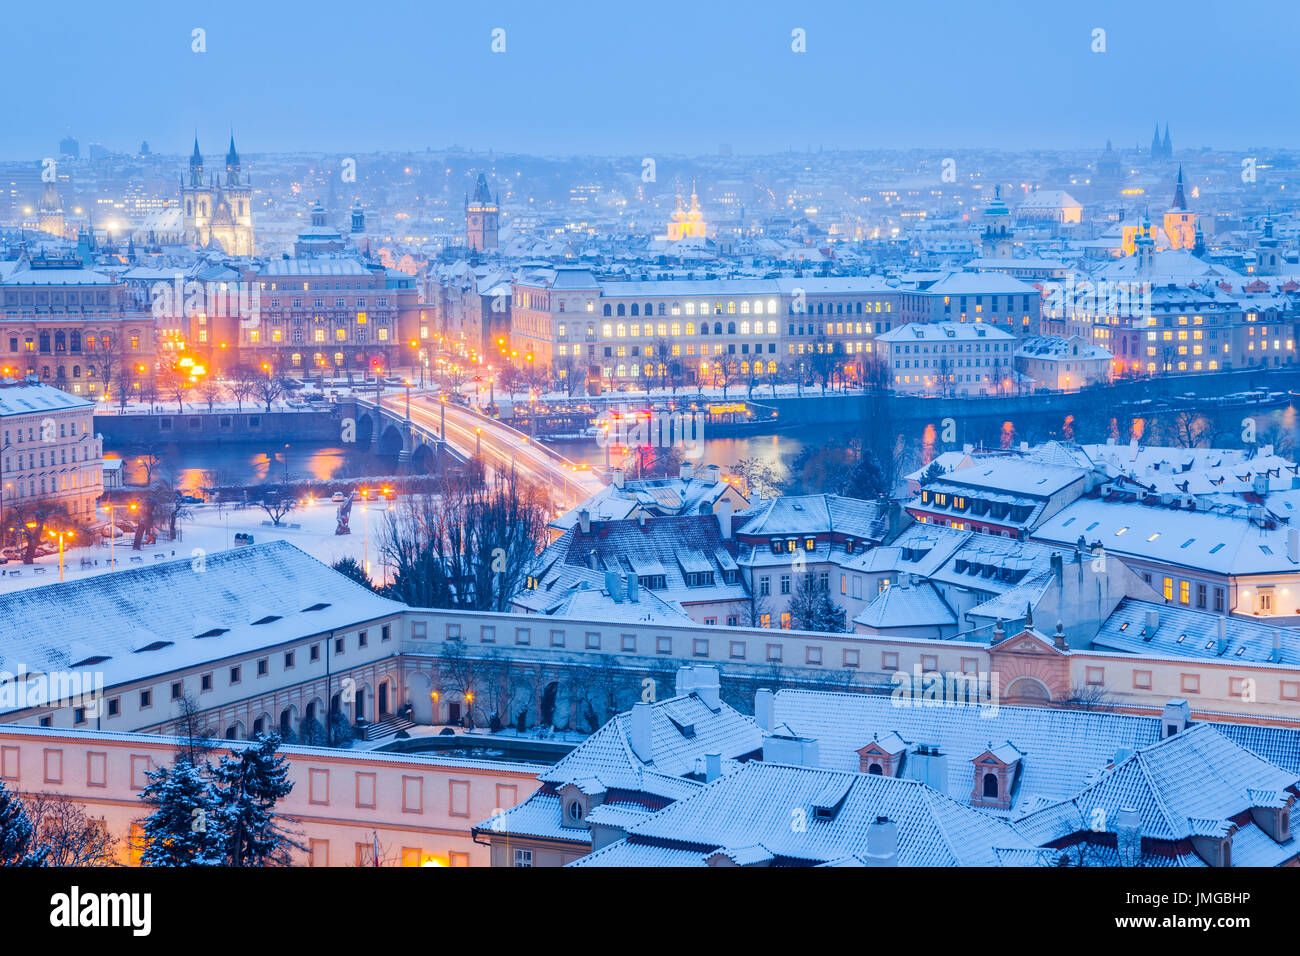 Europe, Czech Republic, Czechia, Prague, Praha, UNESCO, Historical Old Town Panorama with Church towers during winter with snow at night, twilight Stock Photo